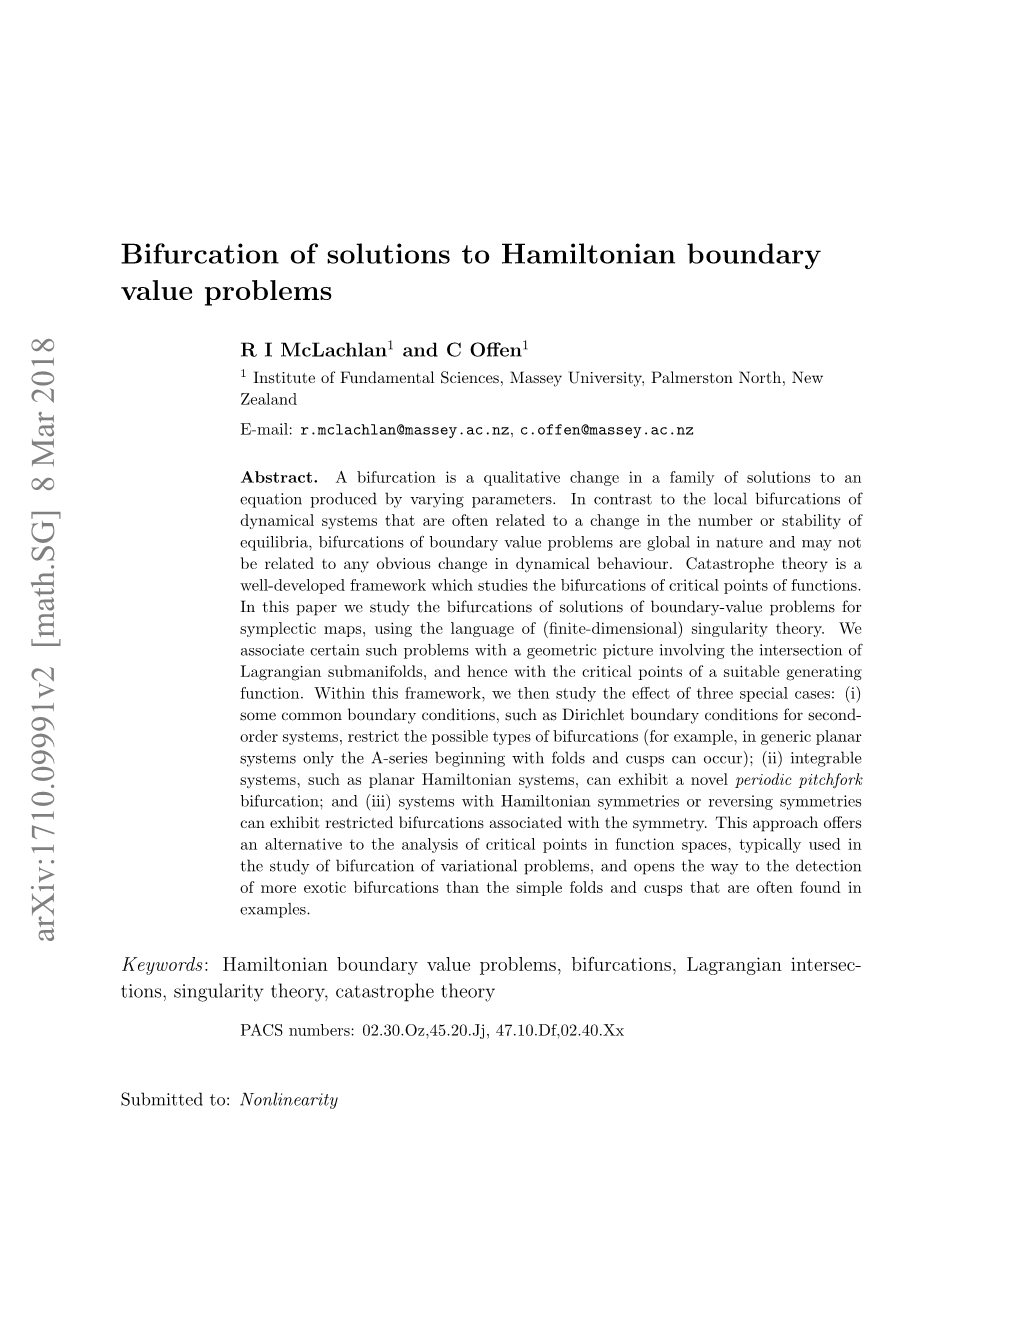 Bifurcation of Solutions to Hamiltonian Boundary Value Problems